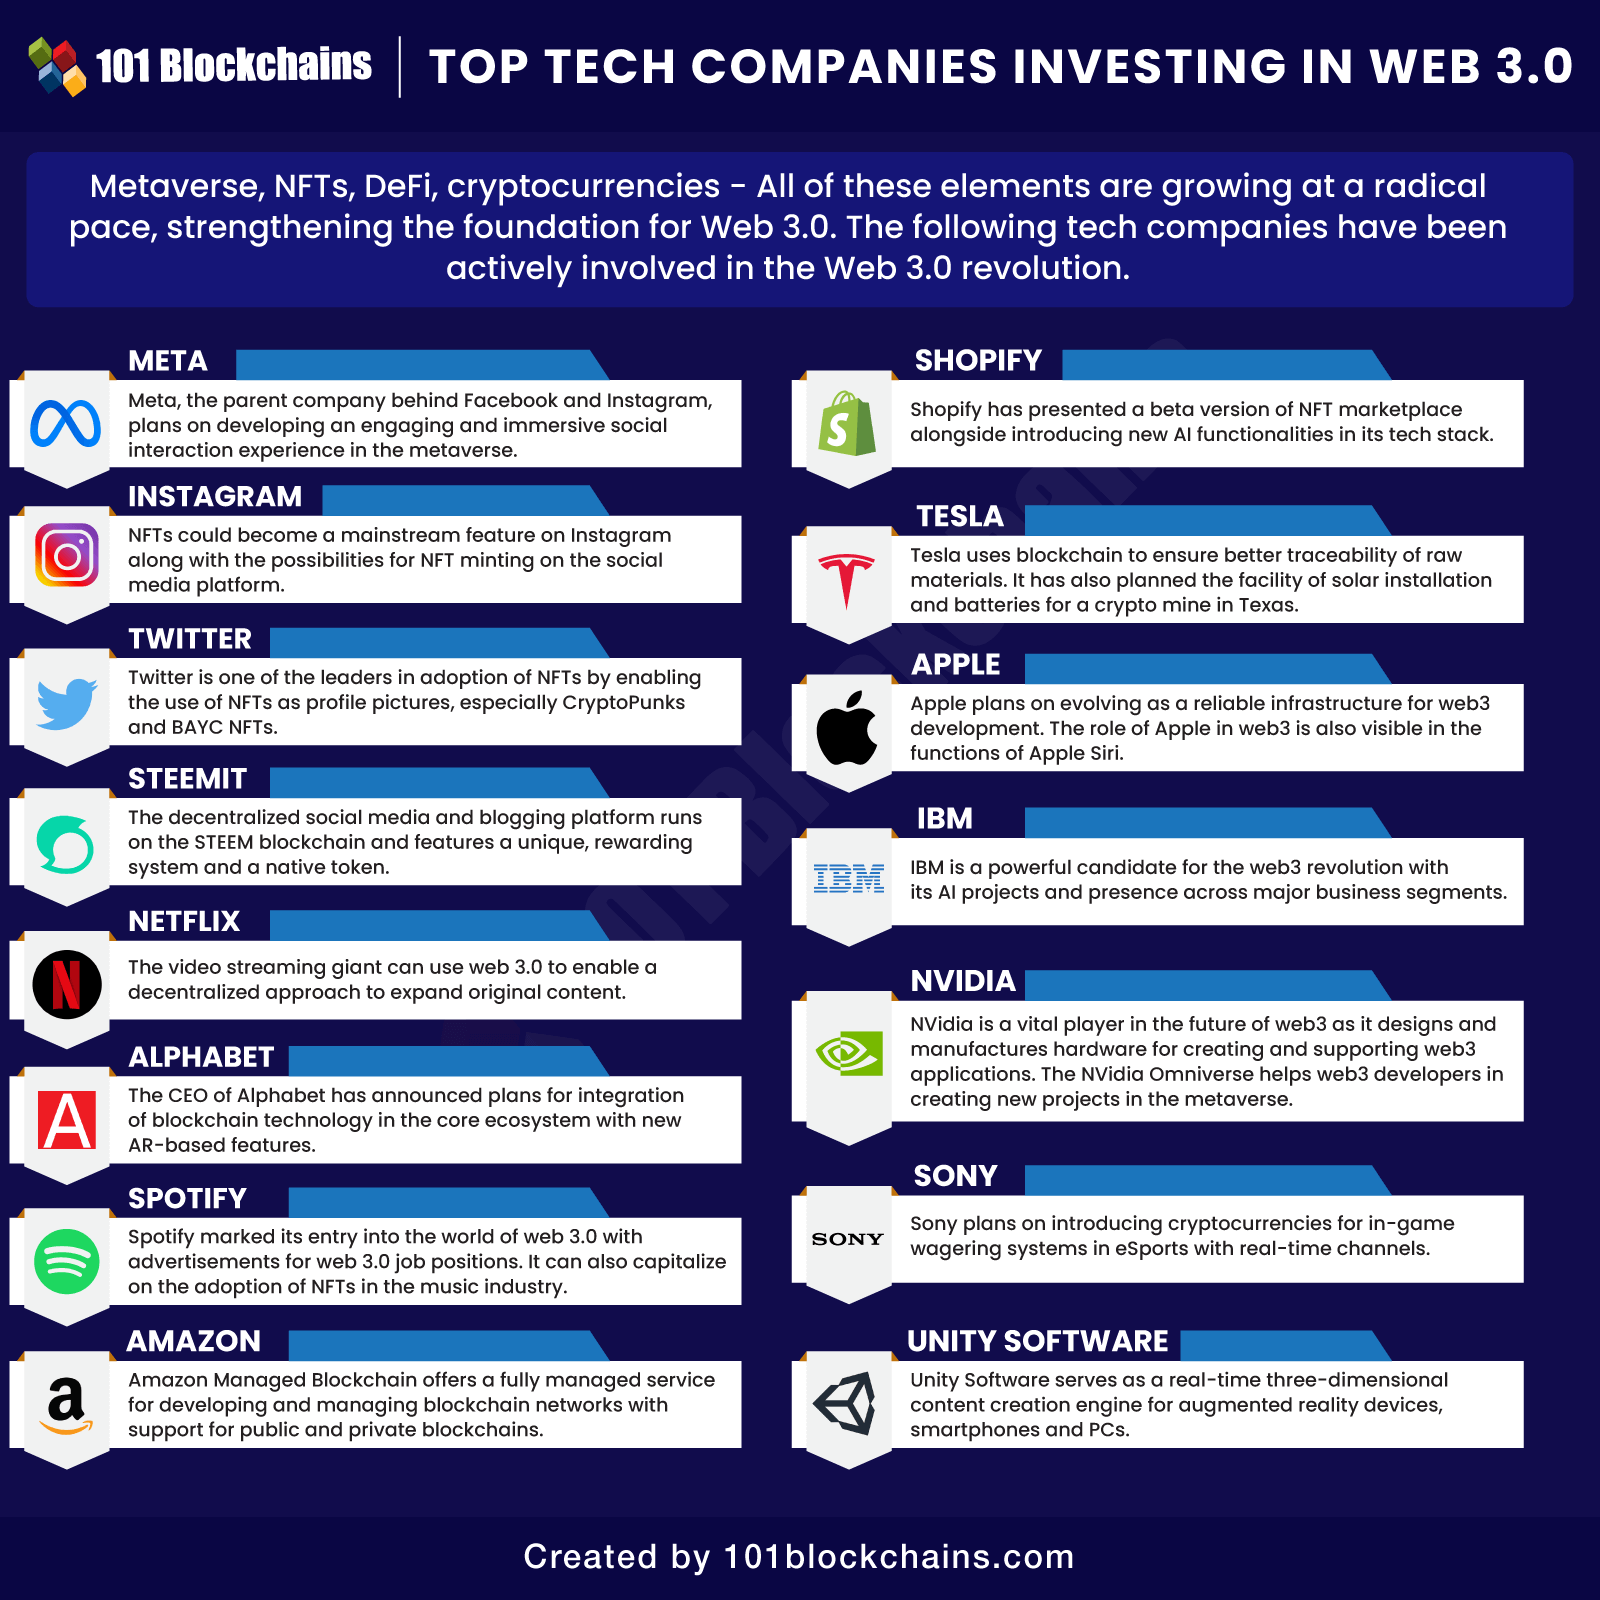 Top Tech Firms Investing in Web 3.0=